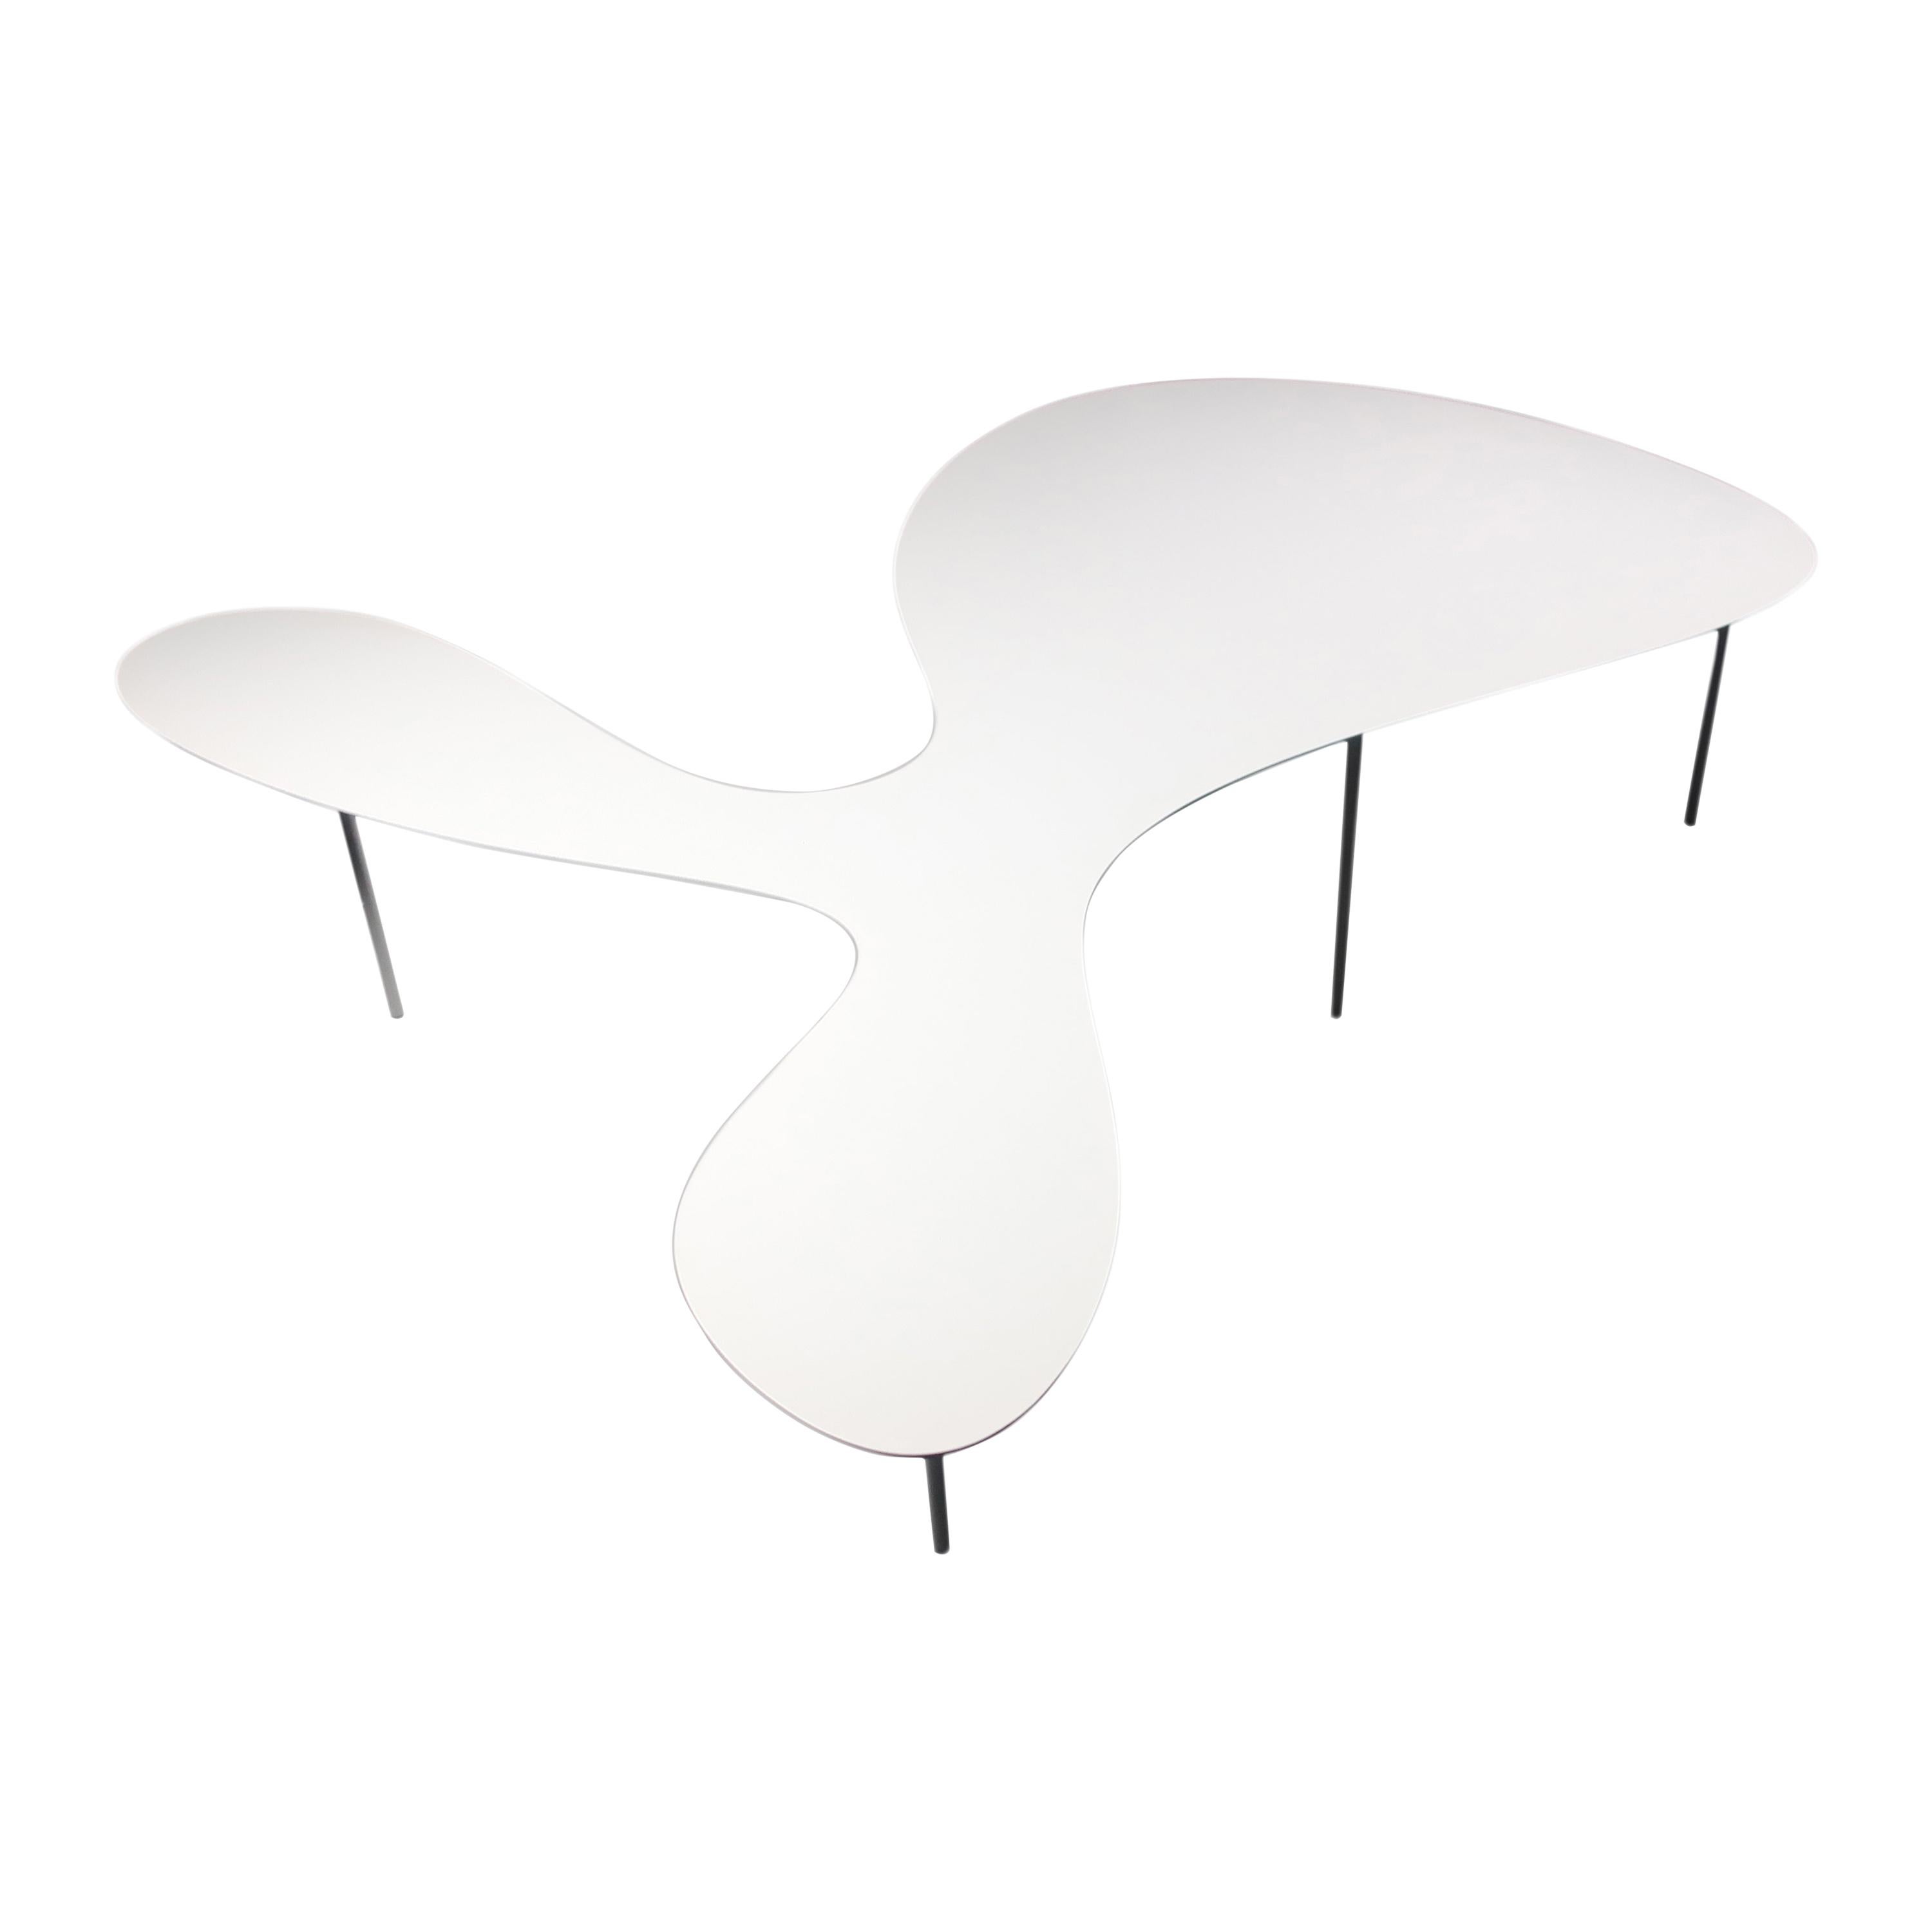 Rabbit Cocktail Table by Studio Juju for Living Divani, 2012 For Sale